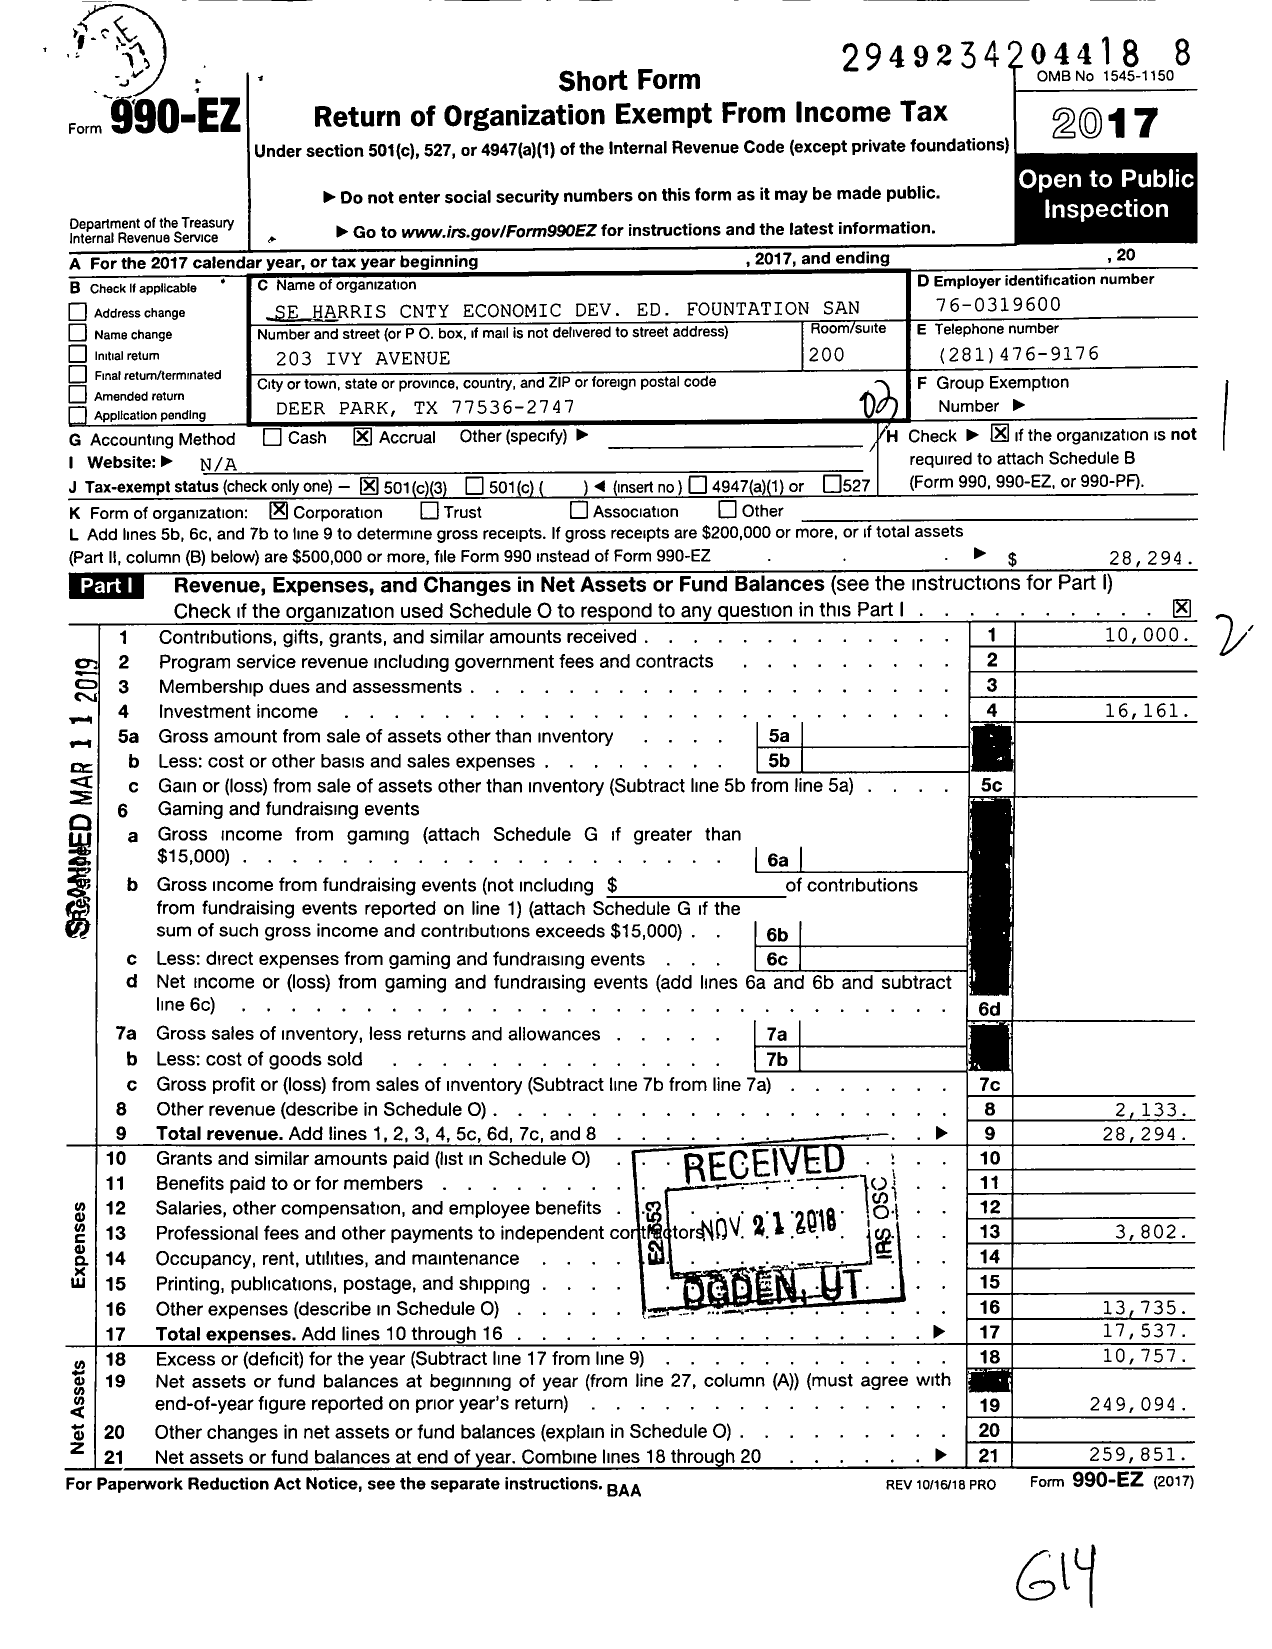 Image of first page of 2017 Form 990EZ for Se Harris County Economic Dev Ed Foundation San